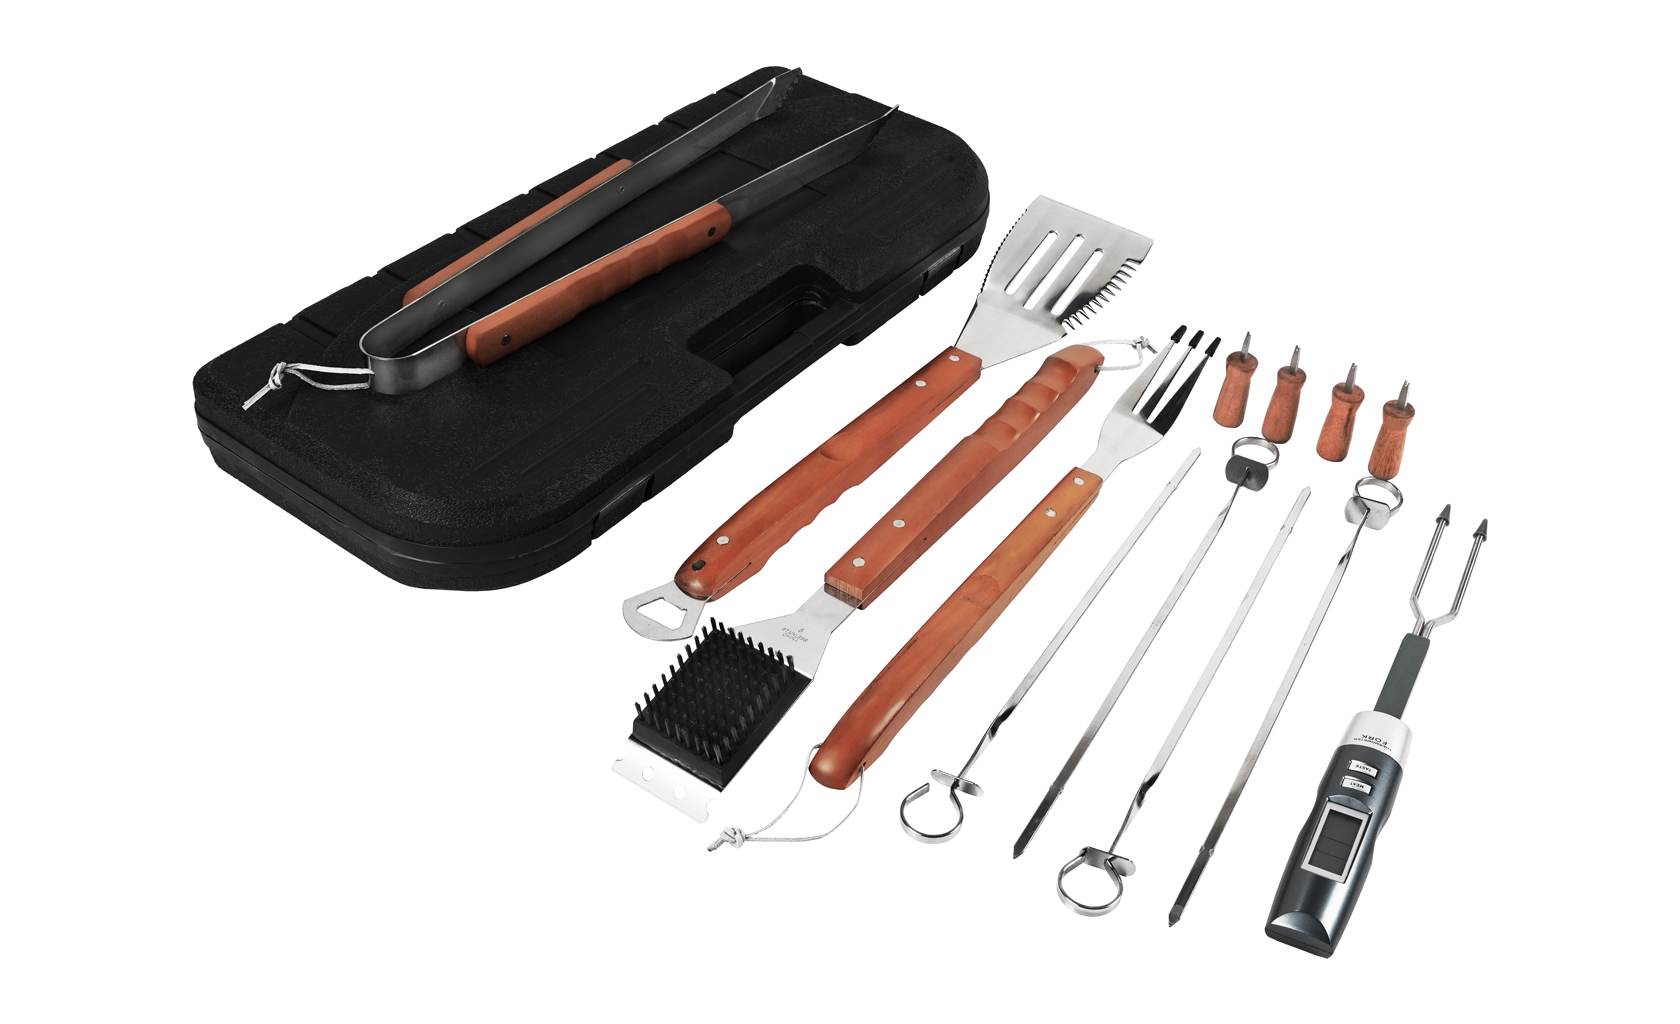 Mr. Bar-B-Q 12 Piece Stainless Steel Tool Set with Bonus Electronic Barbecue Fork - image 2 of 4